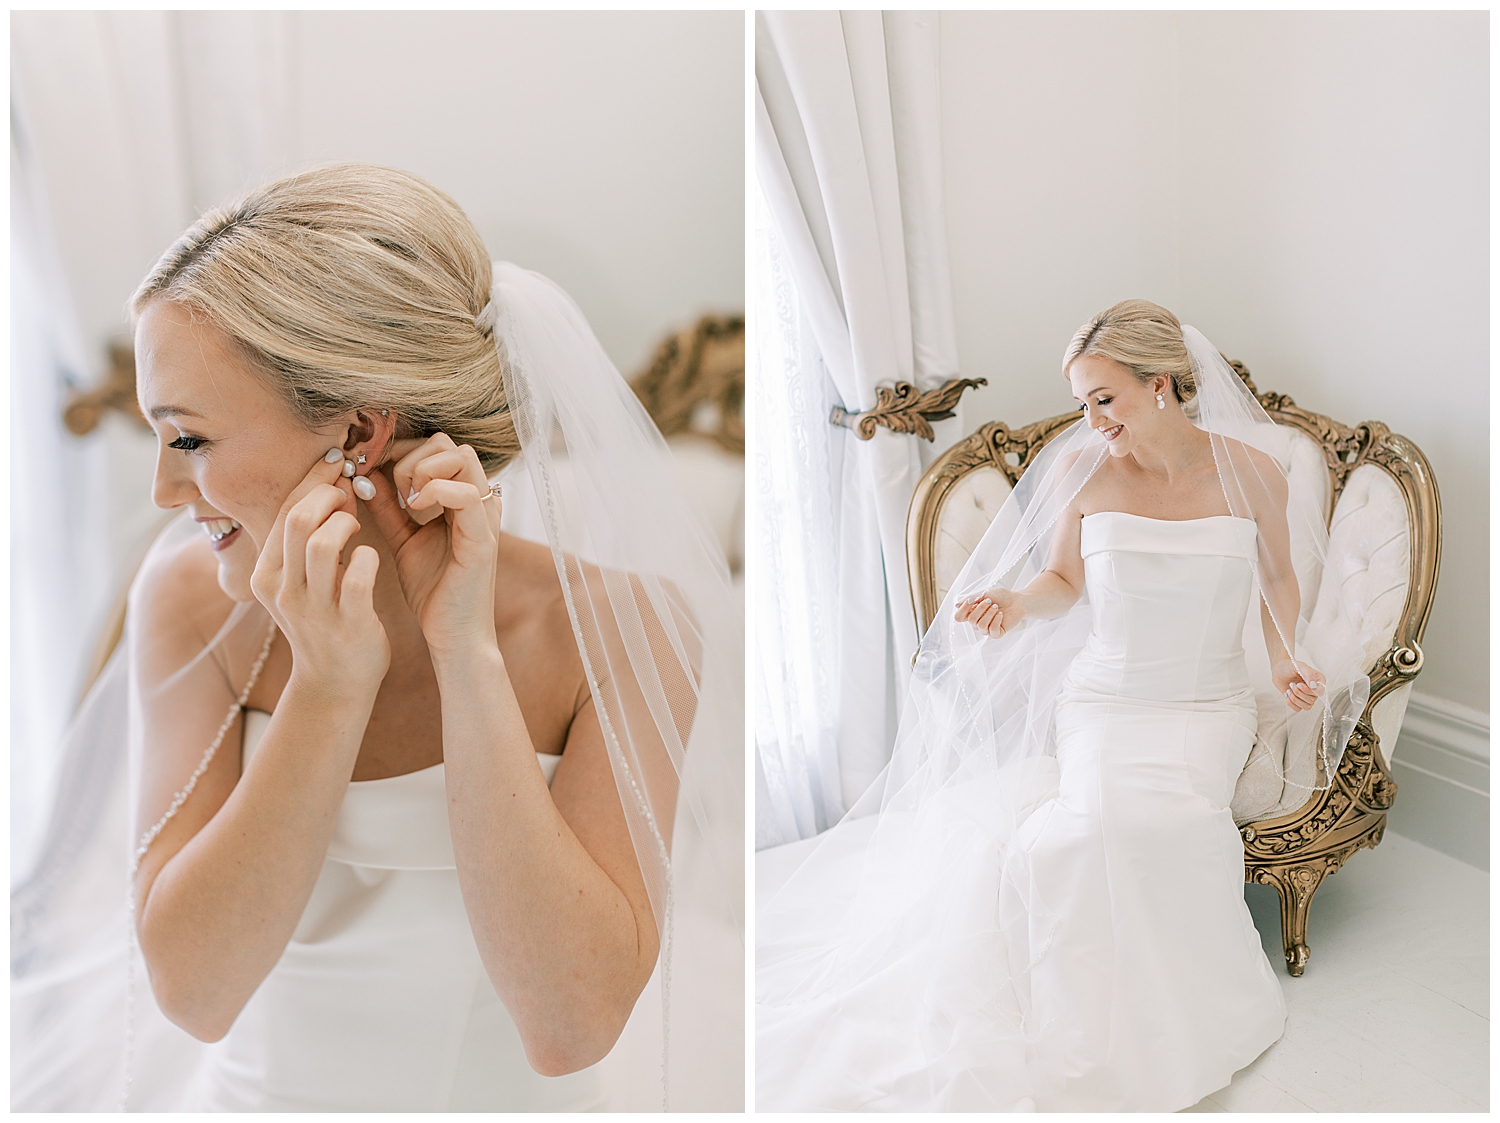 A bride puts her earring in while sitting in a white room.